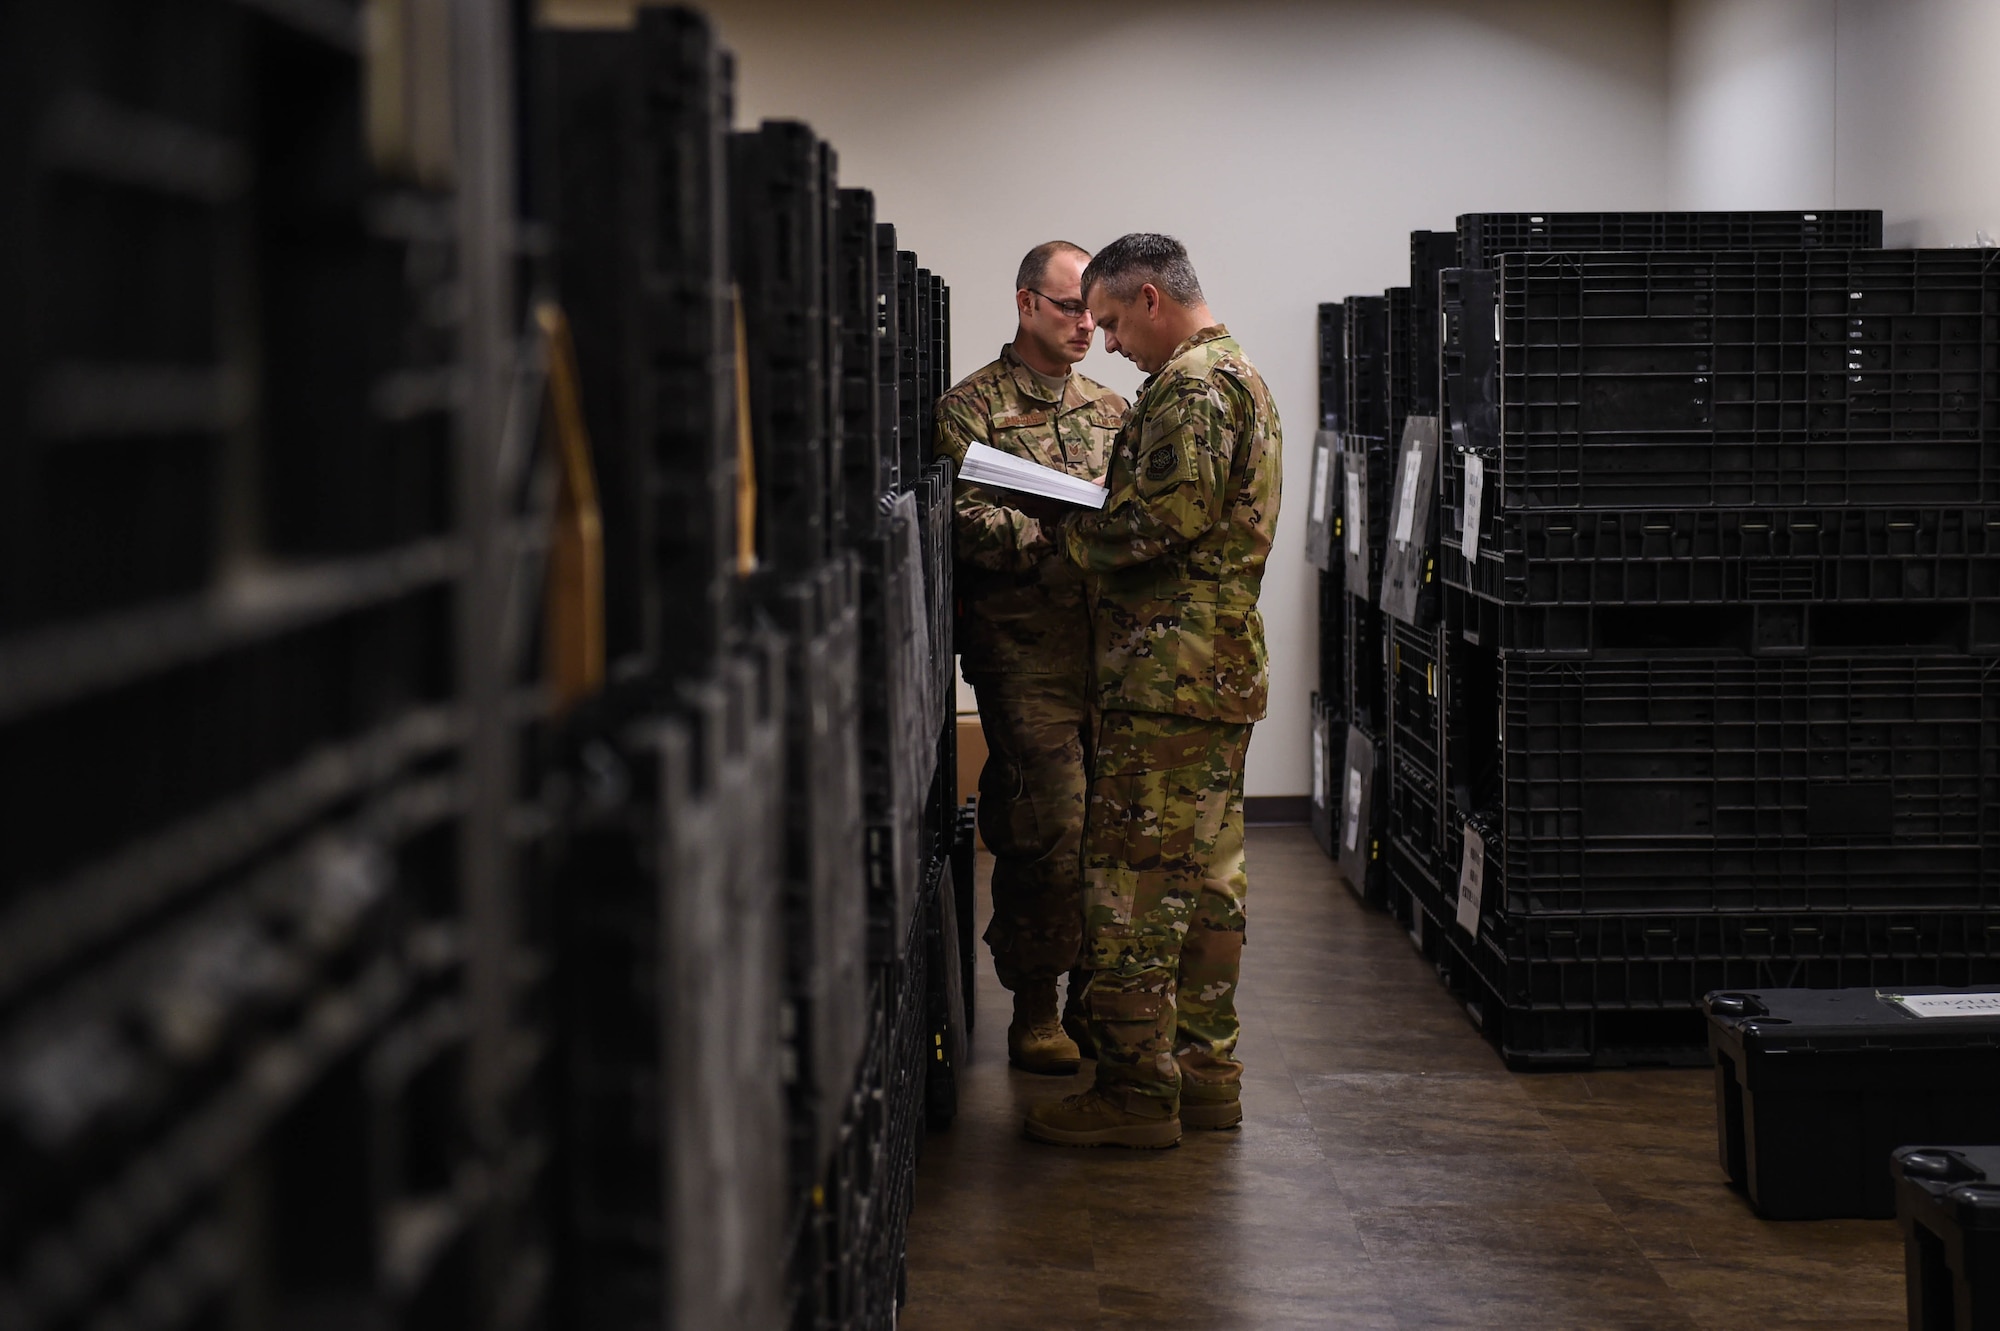 Tech. Sgt. Ryan Pappas, 62nd Aerial Port Squadron air transportation standardization evaluation program evaluator, and Col. Robert Lankford, 62nd Operations Group commander, peruse the in-processing room at the Pfingston Reception Center at Lackland Air Force Base, Texas, Oct. 17, 2019. When new U.S. Air Force basic military trainees arrive at Lackland they go through the in-processing room where they are issued backpacks containing what they need for basic military training.